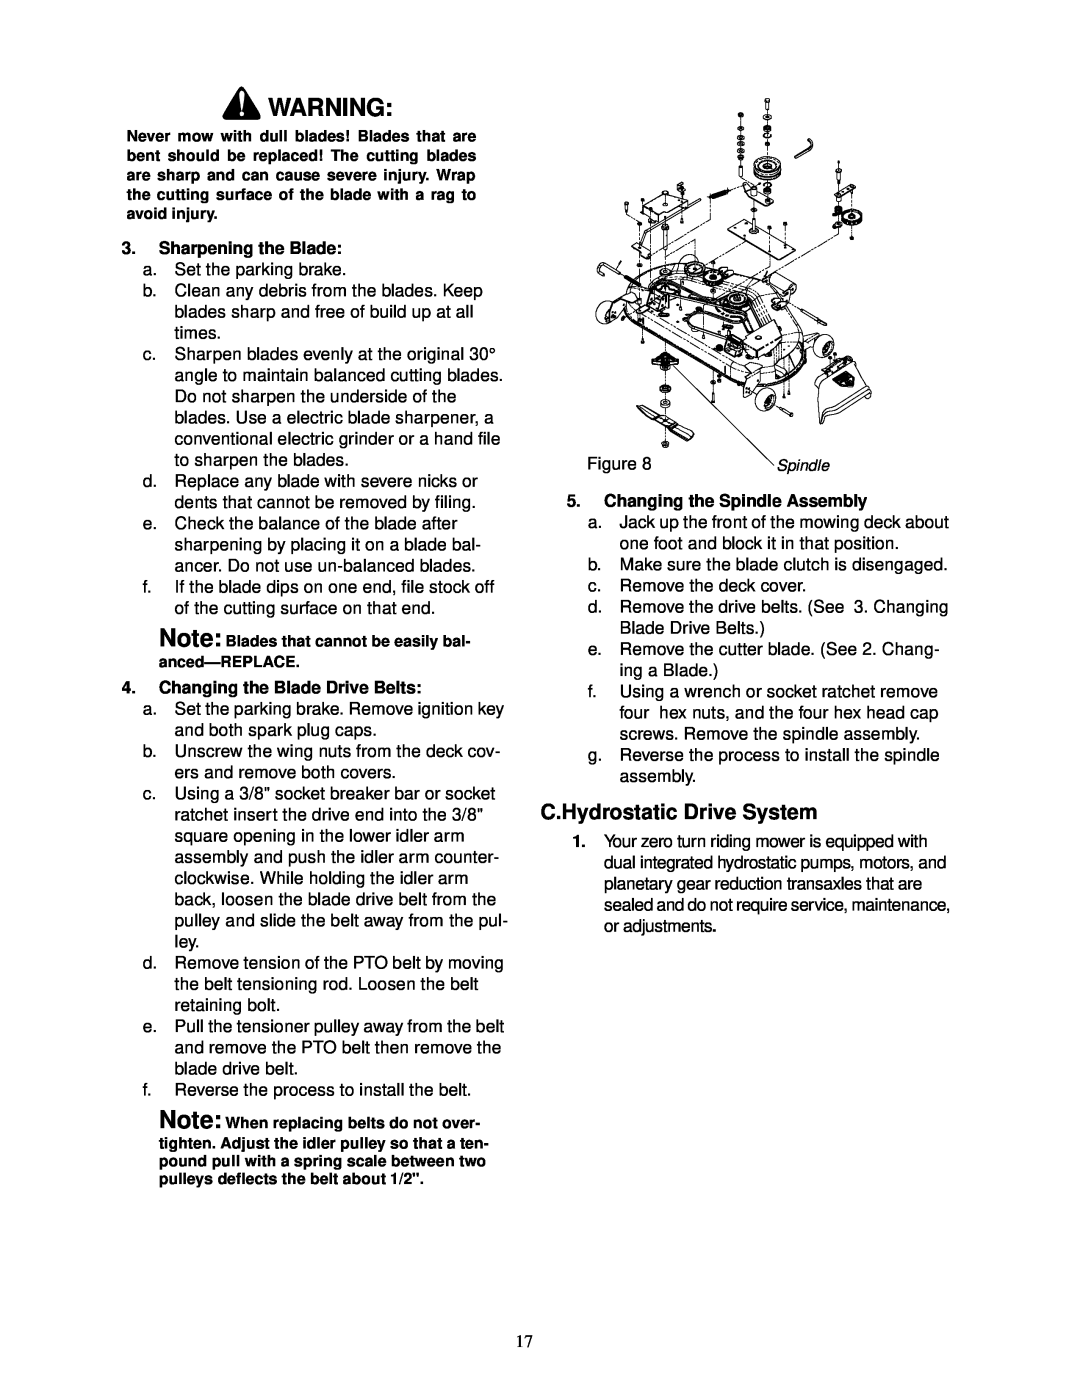 Cub Cadet 23HP Z-Force 50 service manual C.Hydrostatic Drive System, Sharpening the Blade, Changing the Blade Drive Belts 